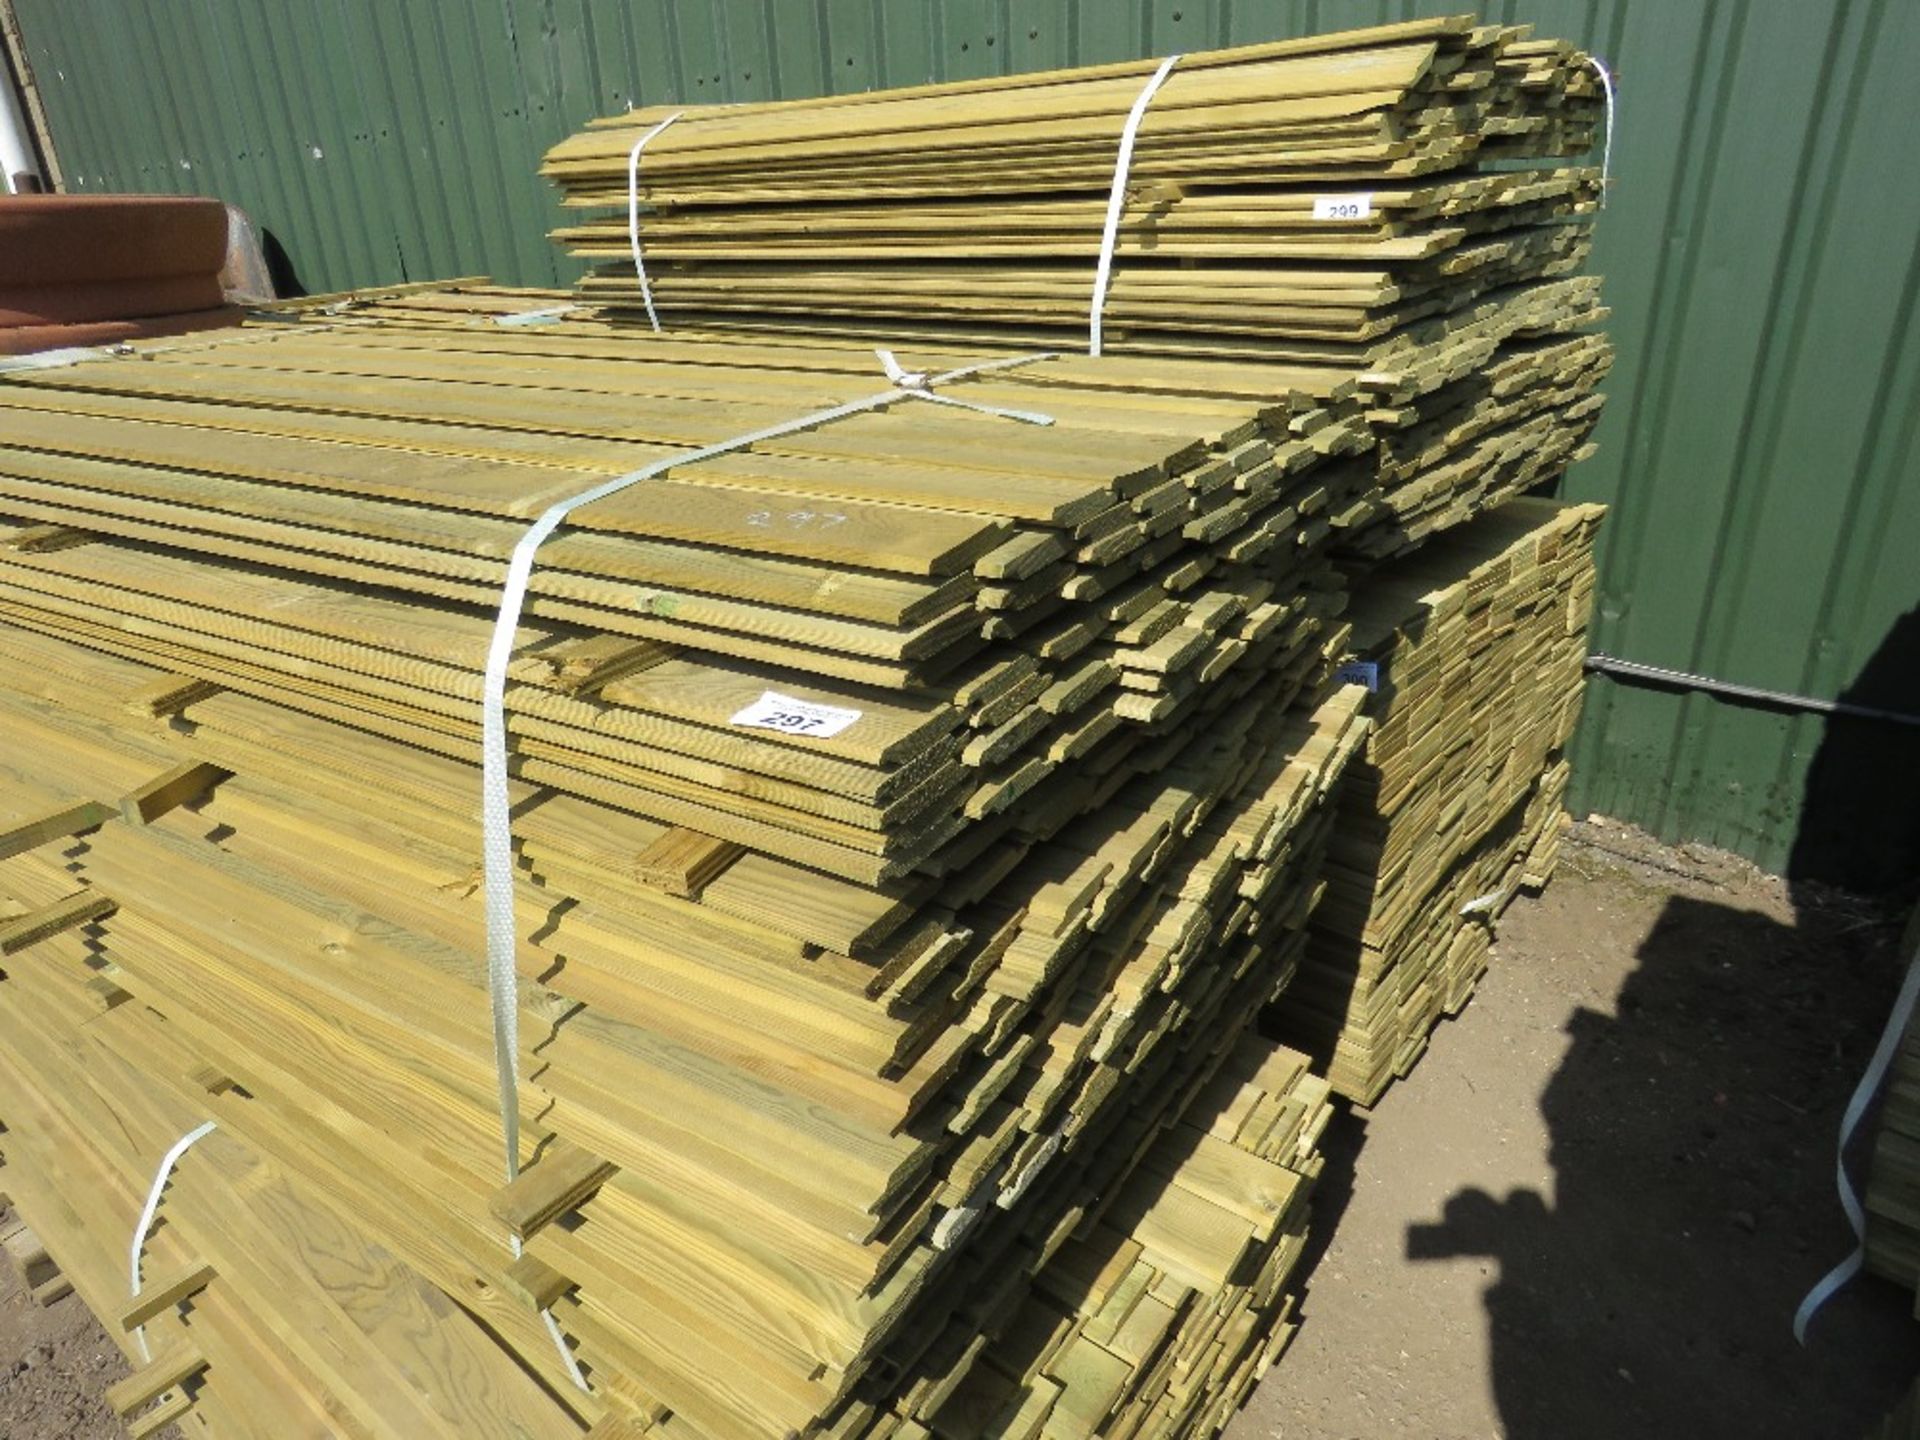 PACK OF PRESSURE TREATED SHIPLAP TIMBER FENCE CLADDING BOARDS, 1.73M LENGTH X 9.5CM WIDTH APPROX. - Image 2 of 2